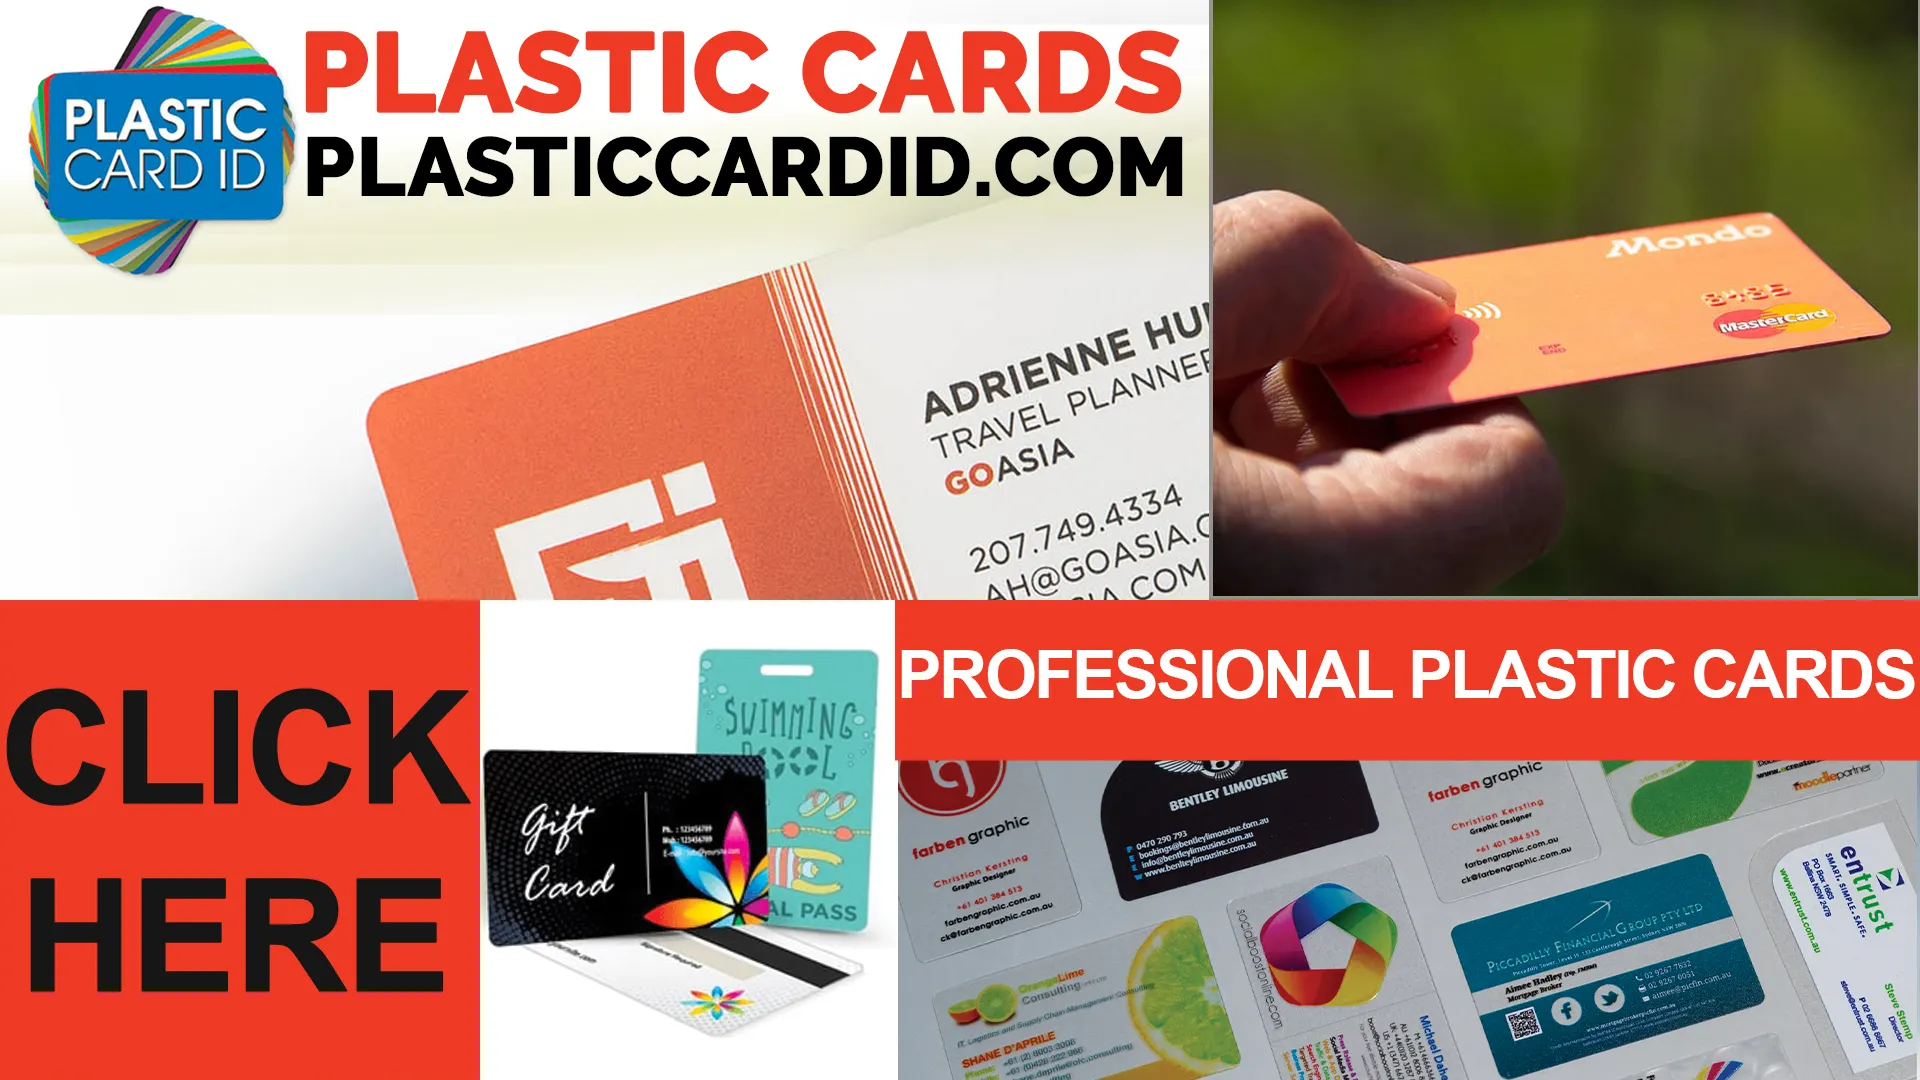 Your One-Stop Shop for Card Printers and Supplies